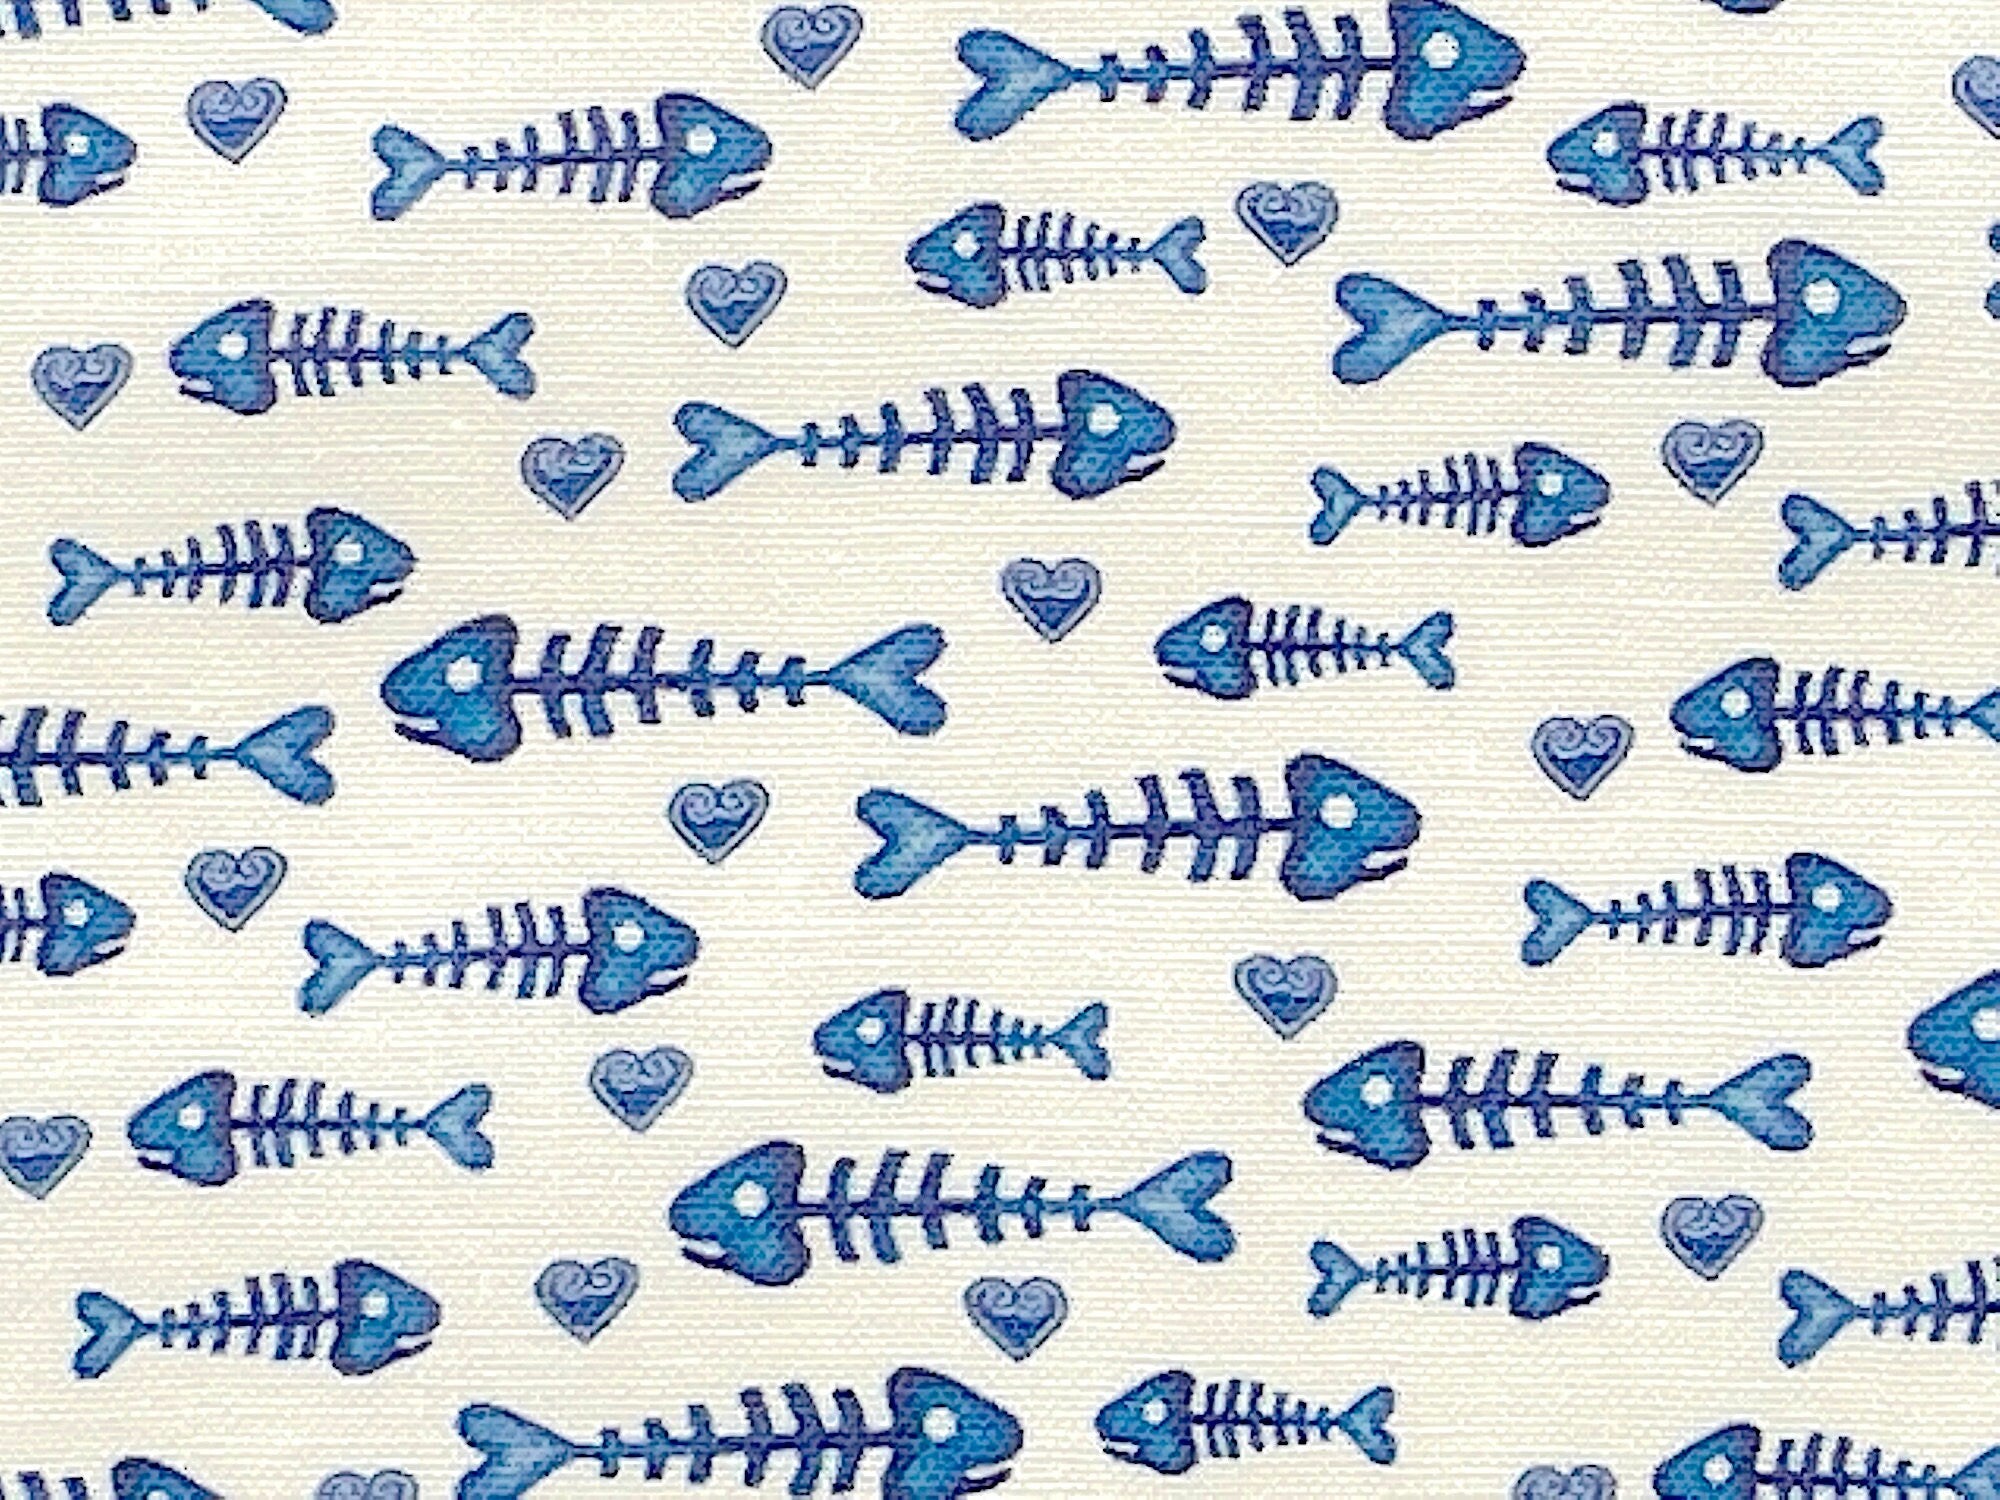 This white fabric is covered with fish bones. This fabric is part of the Kitty City collection by Andi Metz.